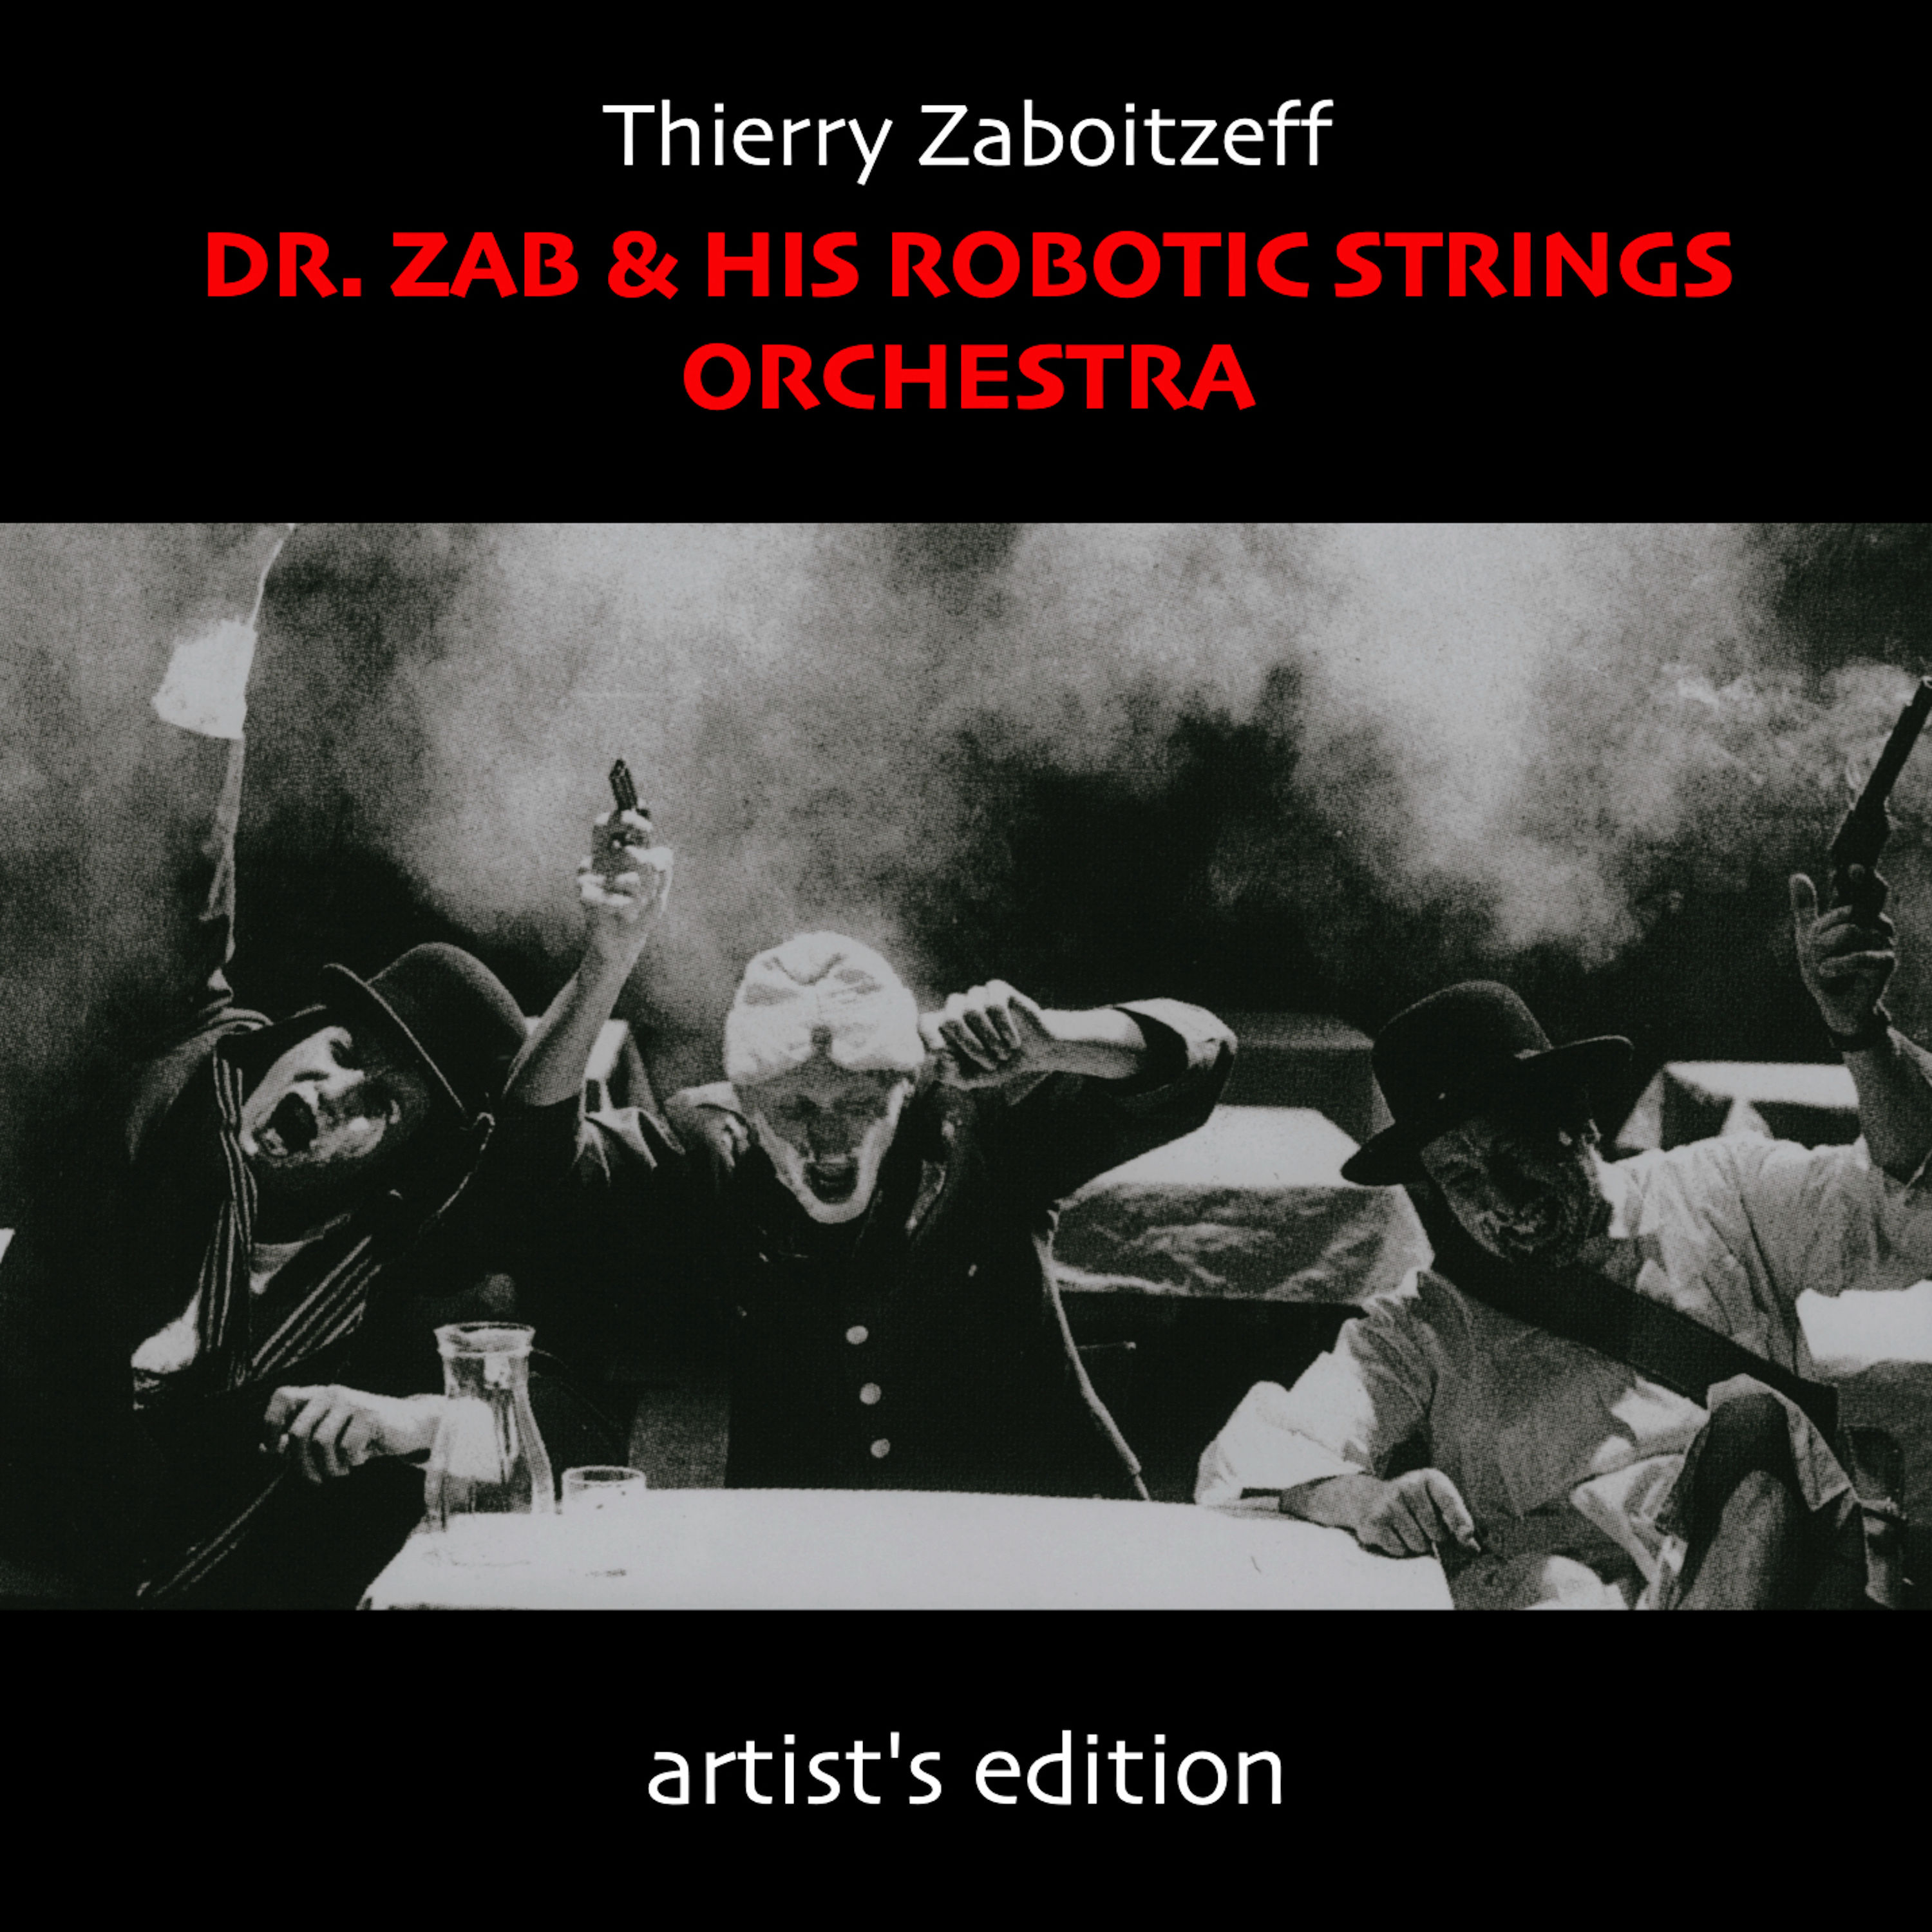 Dr Zab and his robotic strings orchestra - artists edition